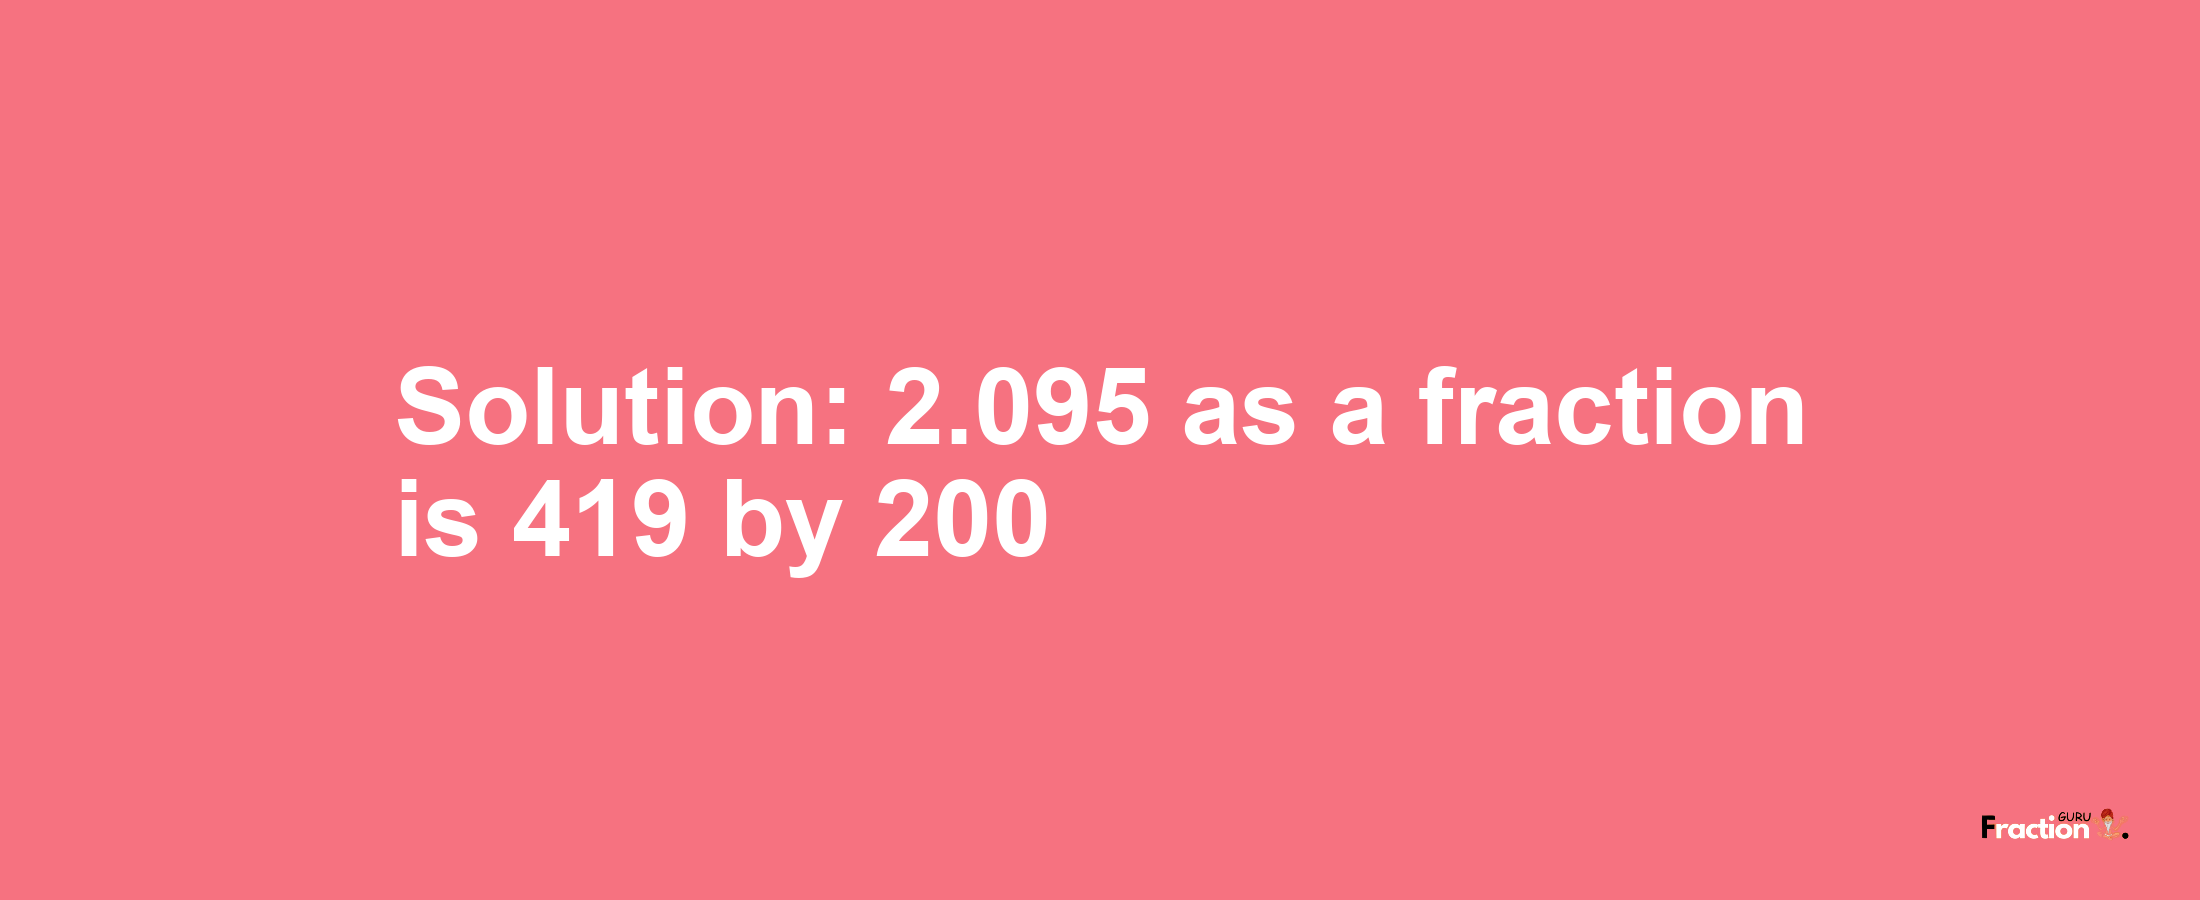 Solution:2.095 as a fraction is 419/200